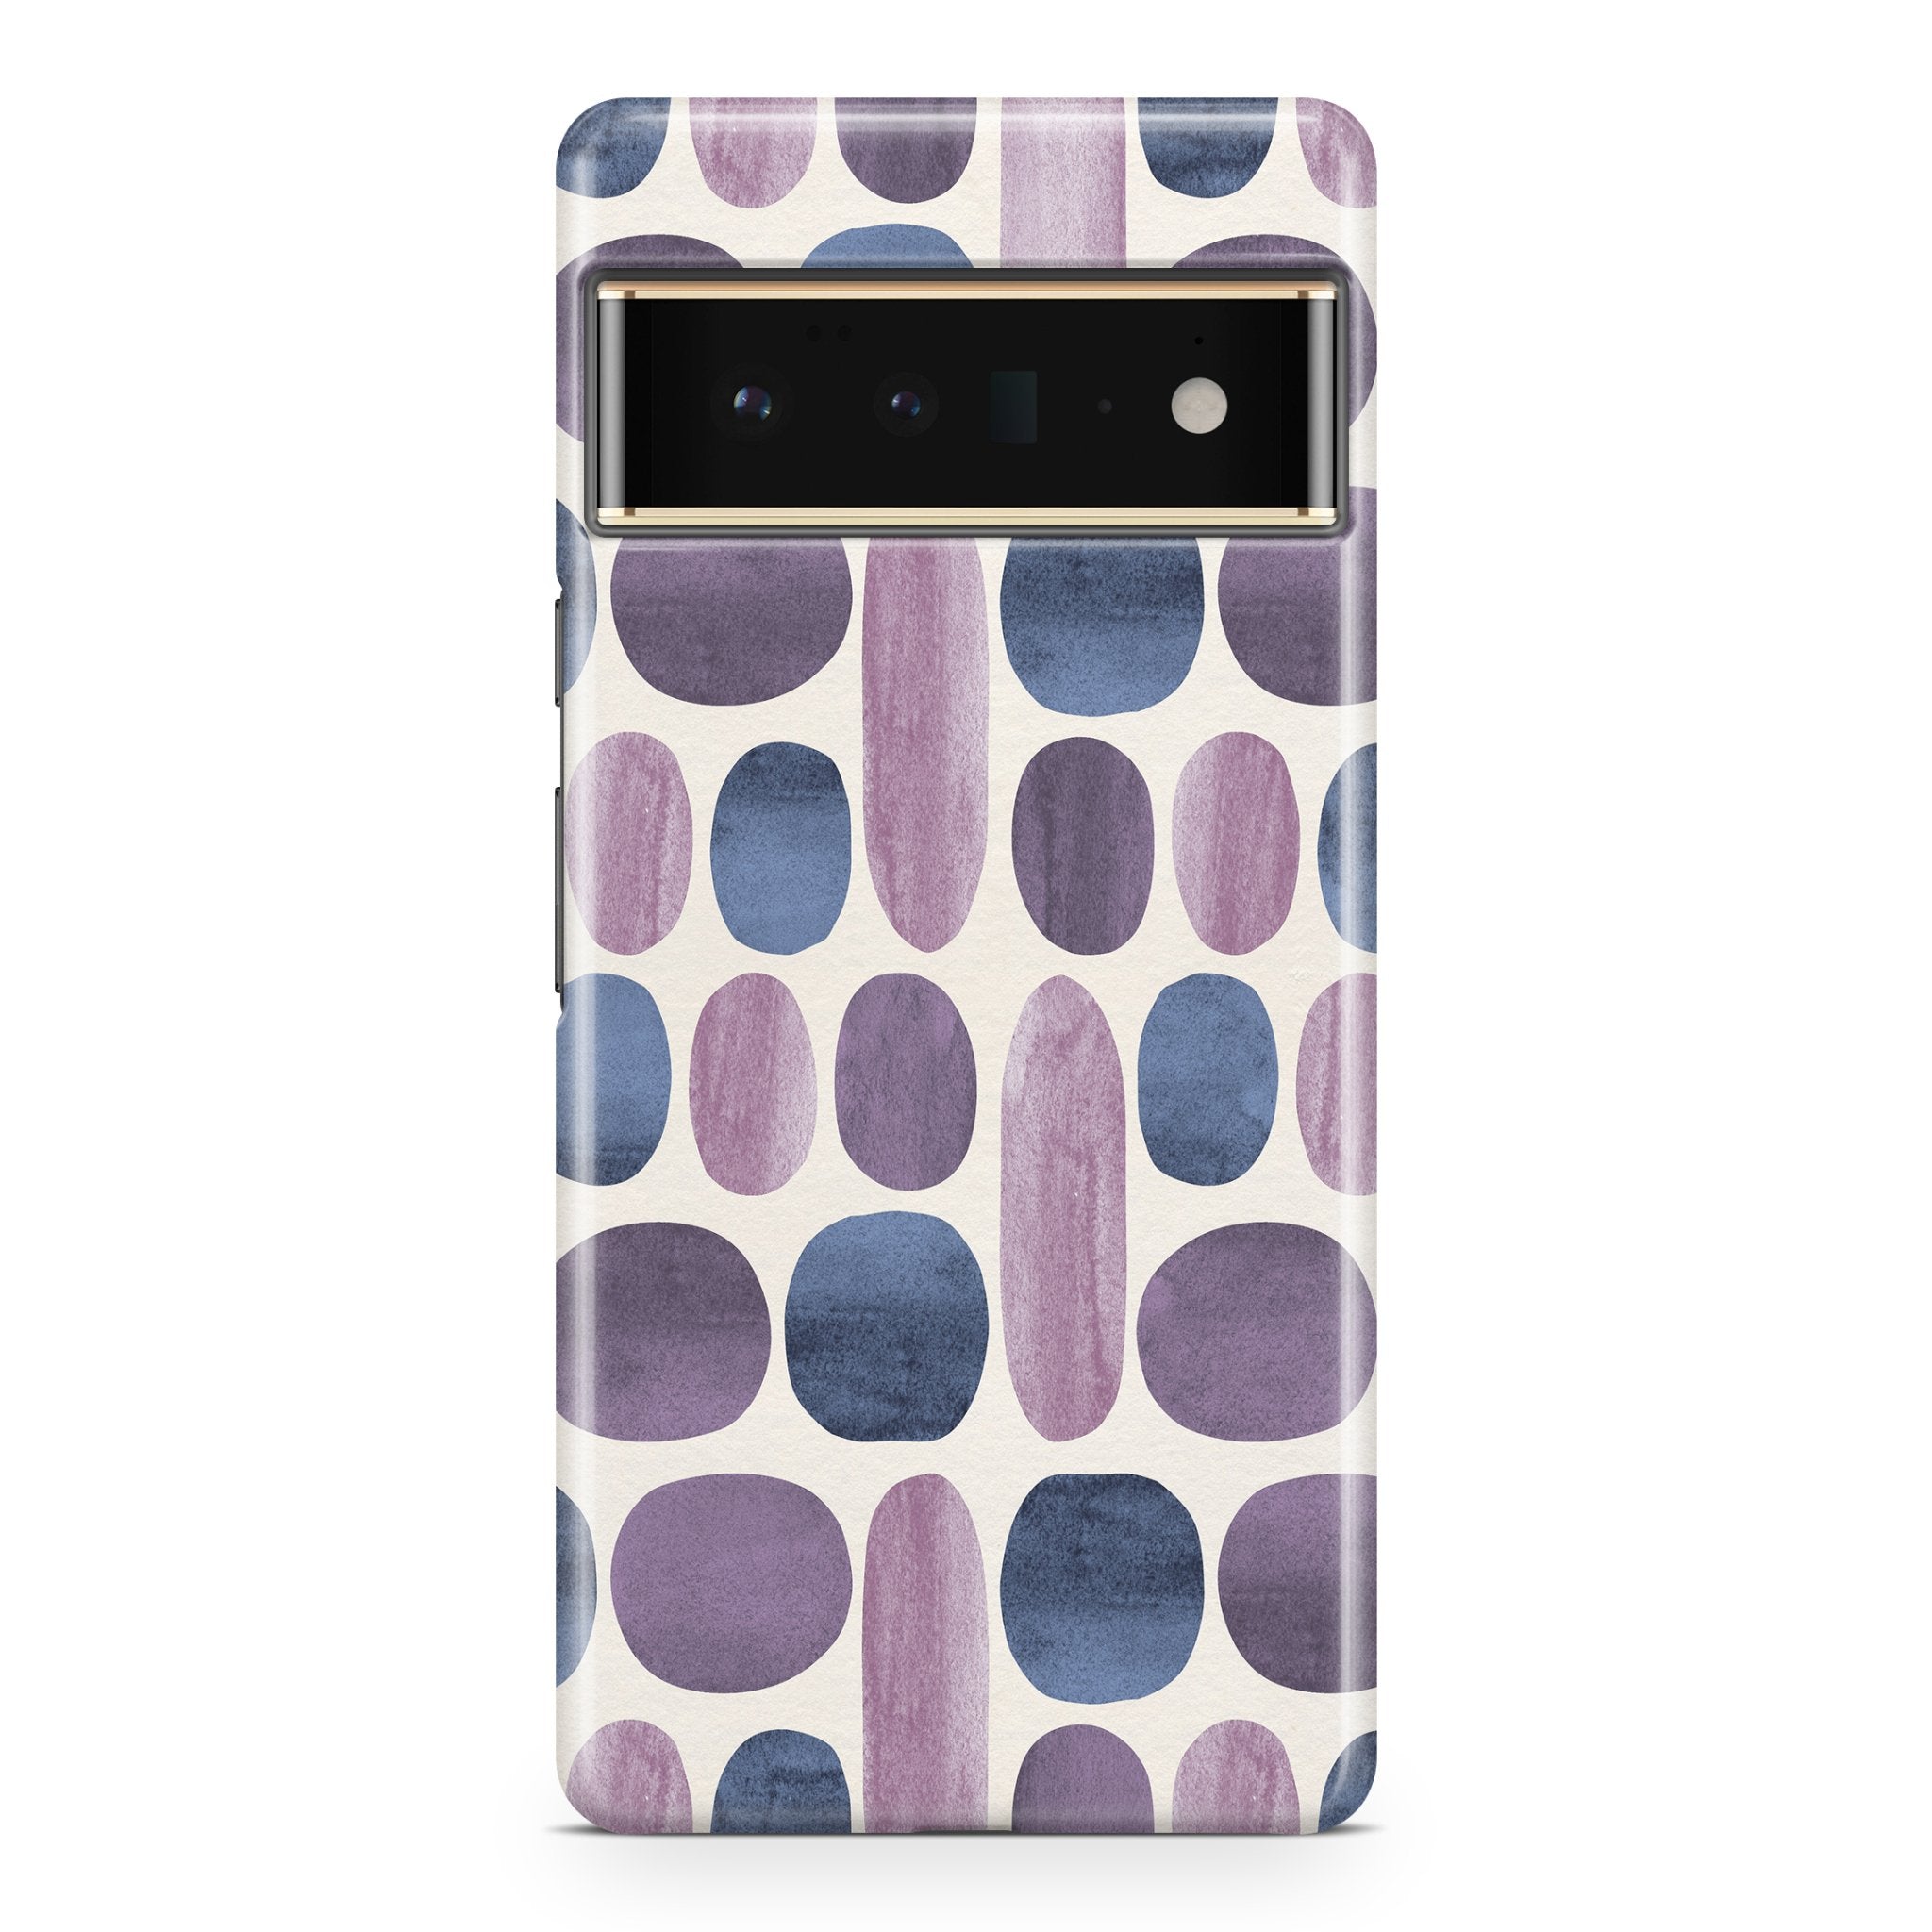 Indigo & Orchids - Google phone case designs by CaseSwagger